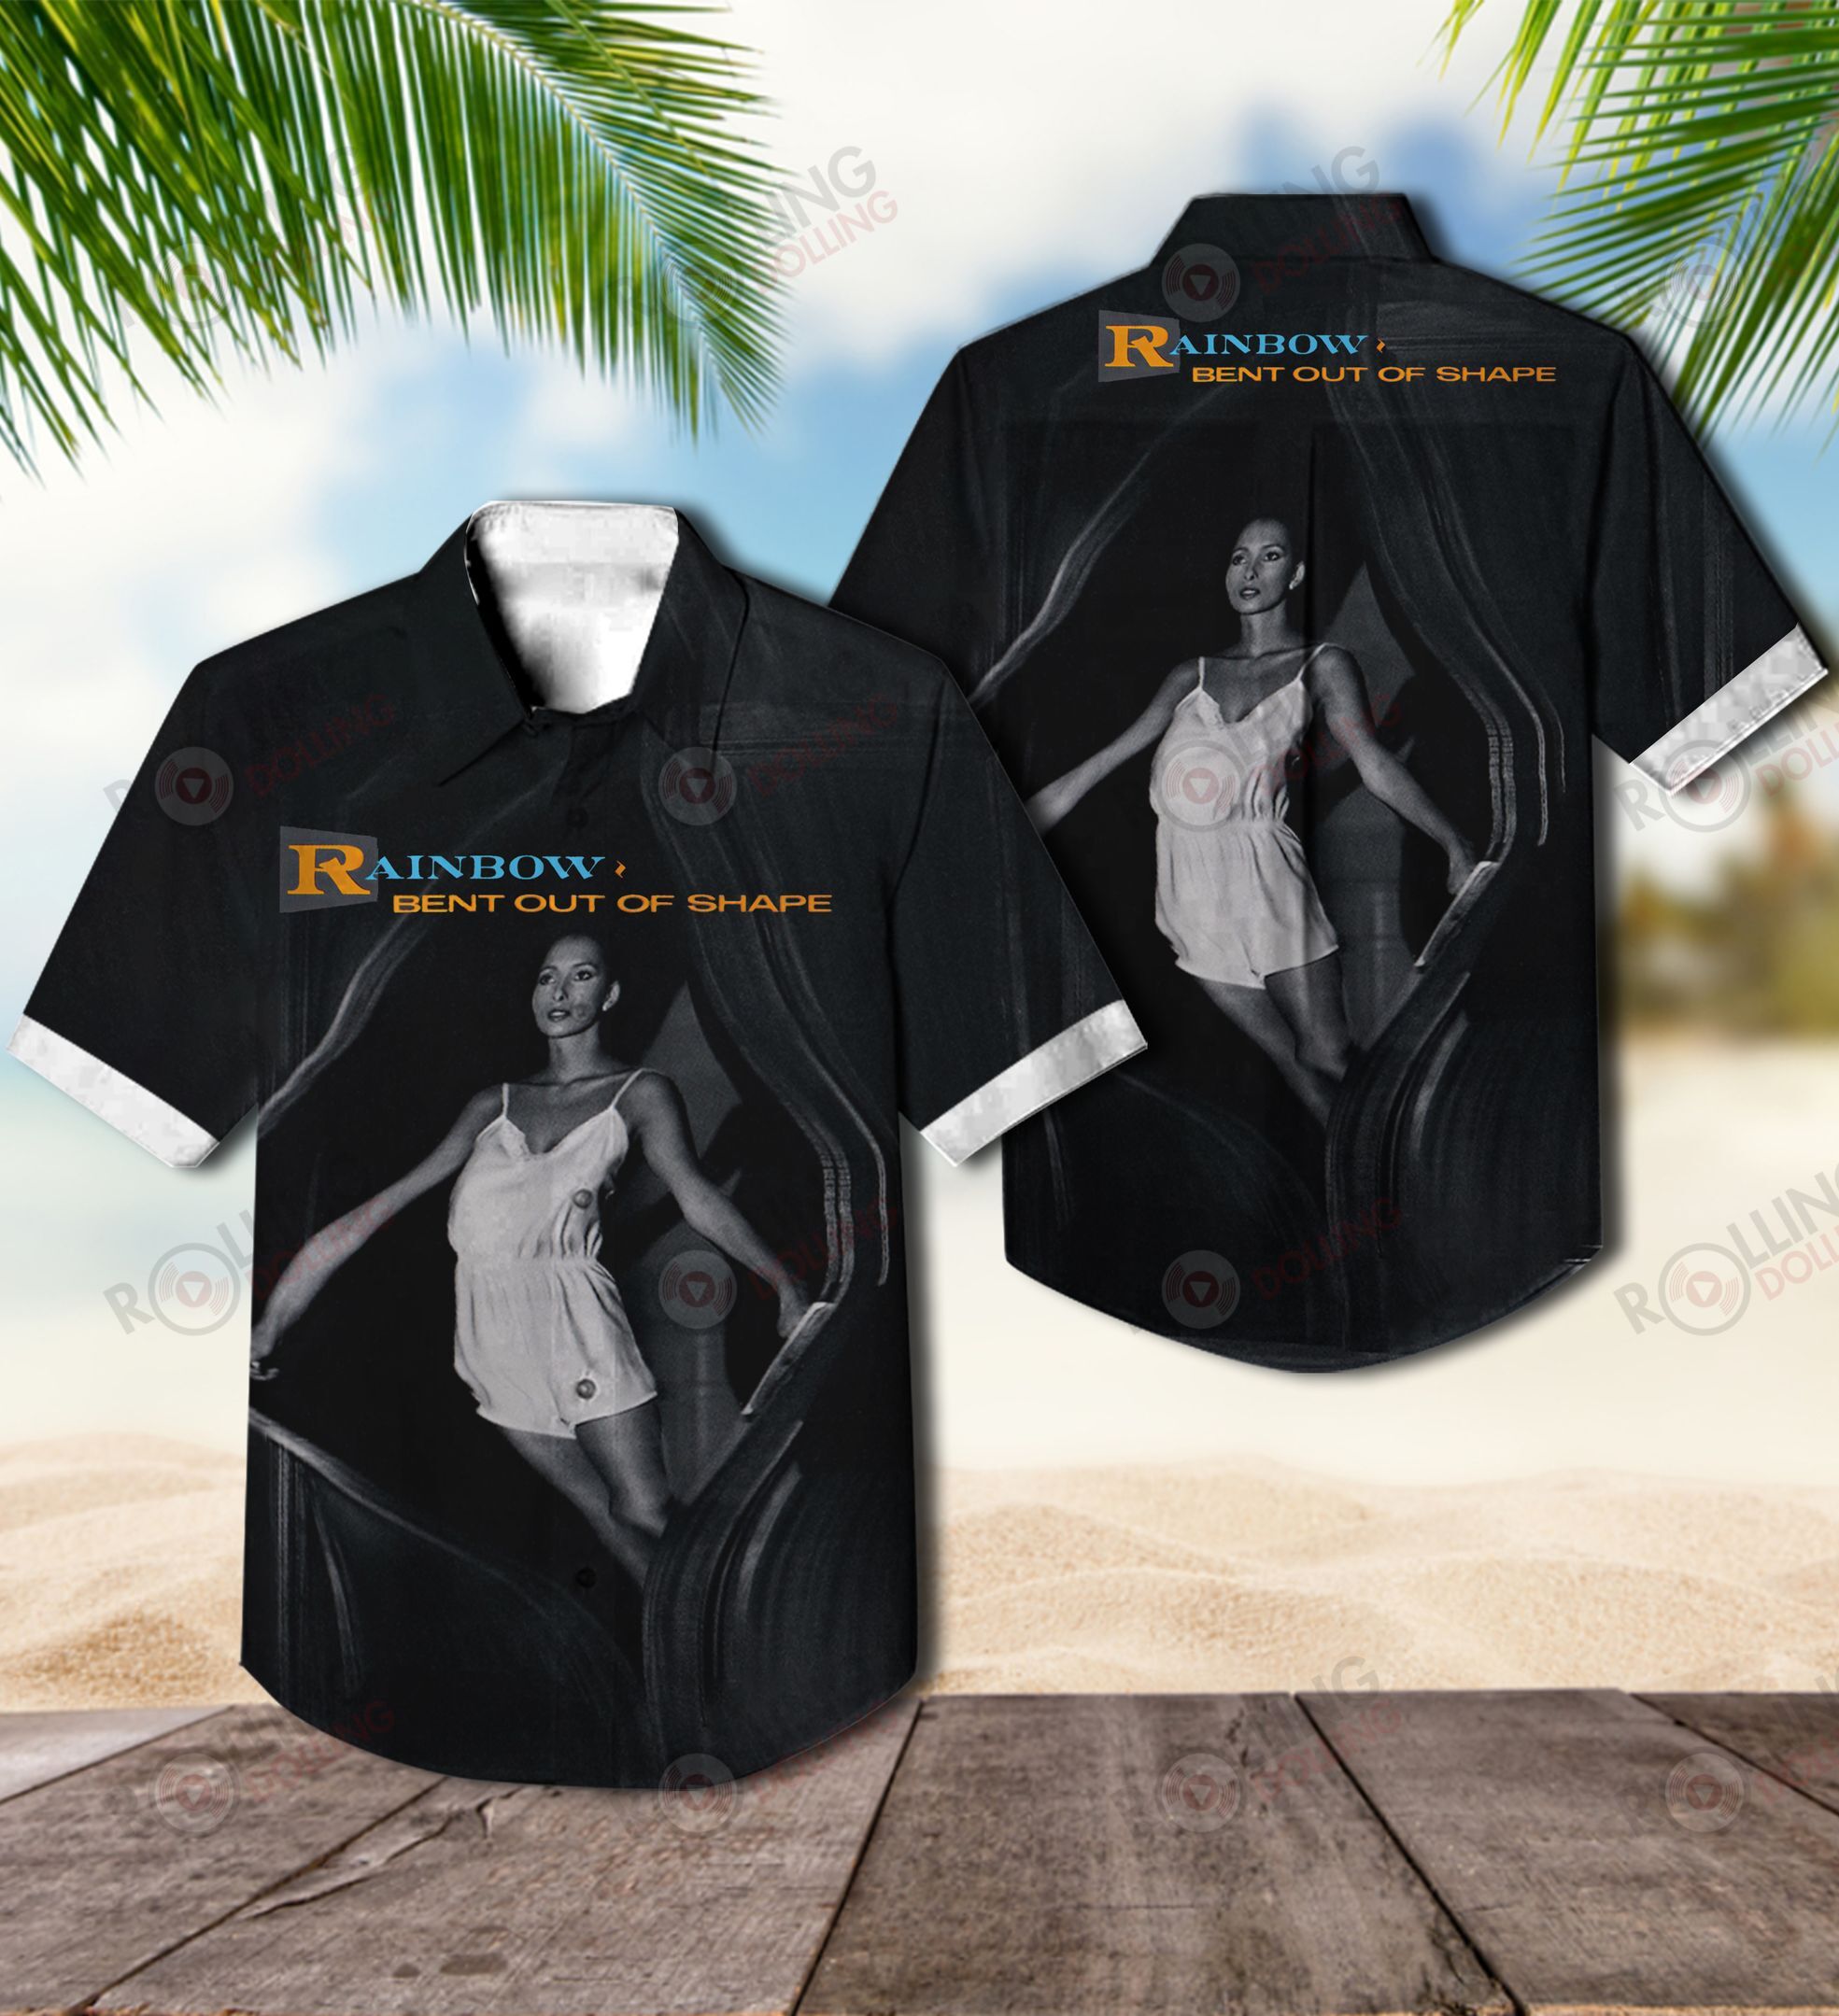 This would make a great gift for any fan who loves Hawaiian Shirt as well as Rock band 5